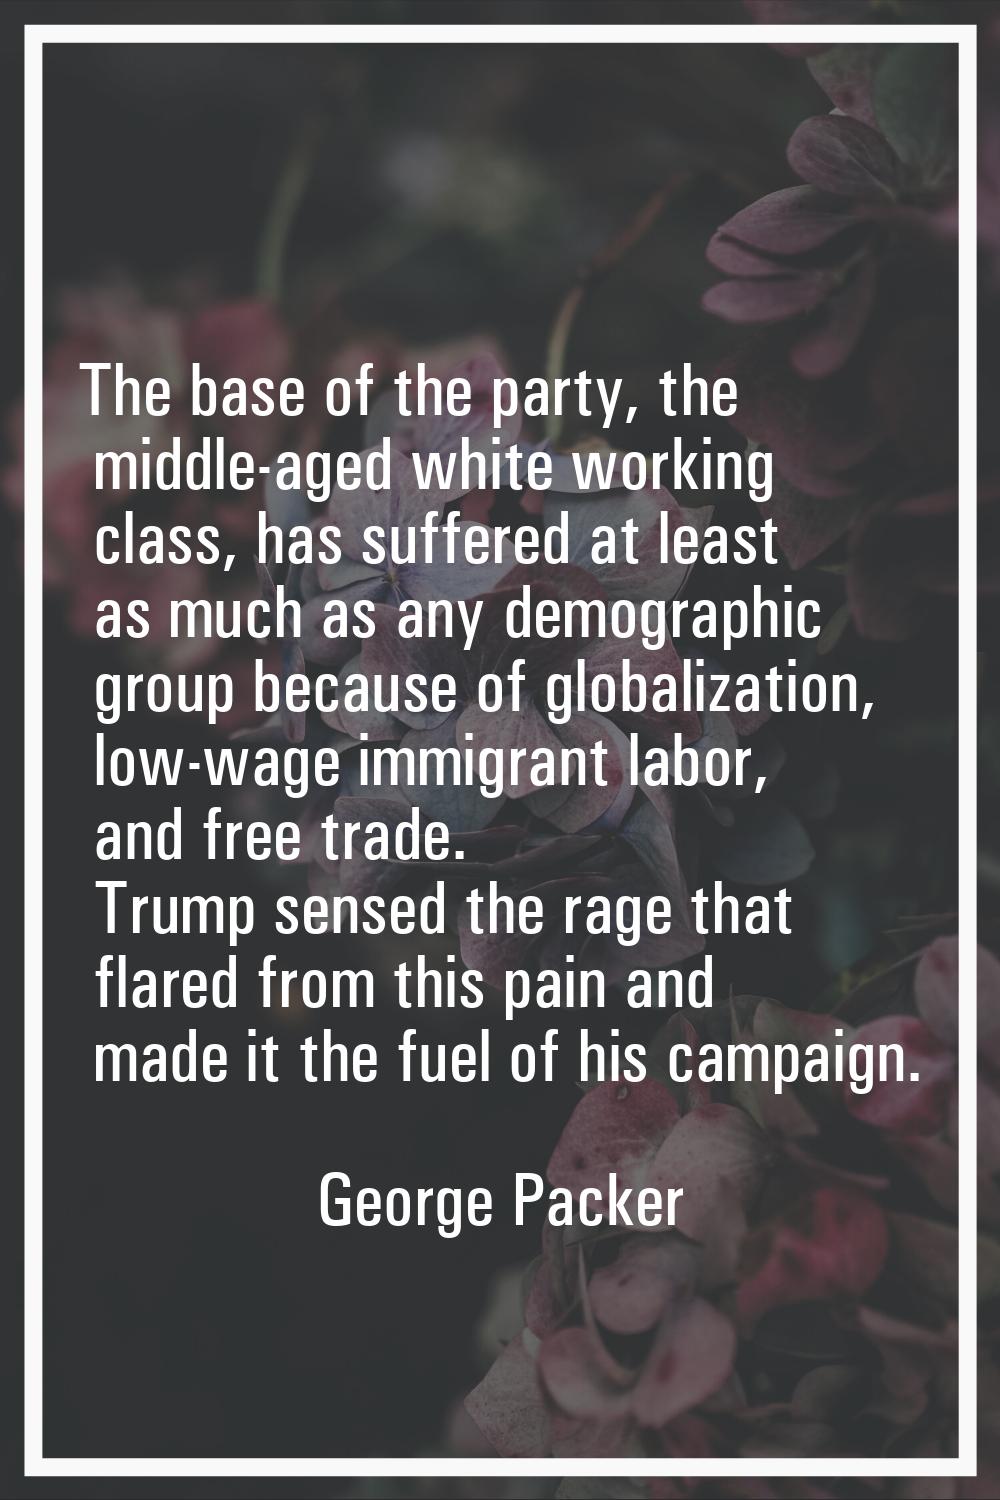 The base of the party, the middle-aged white working class, has suffered at least as much as any de